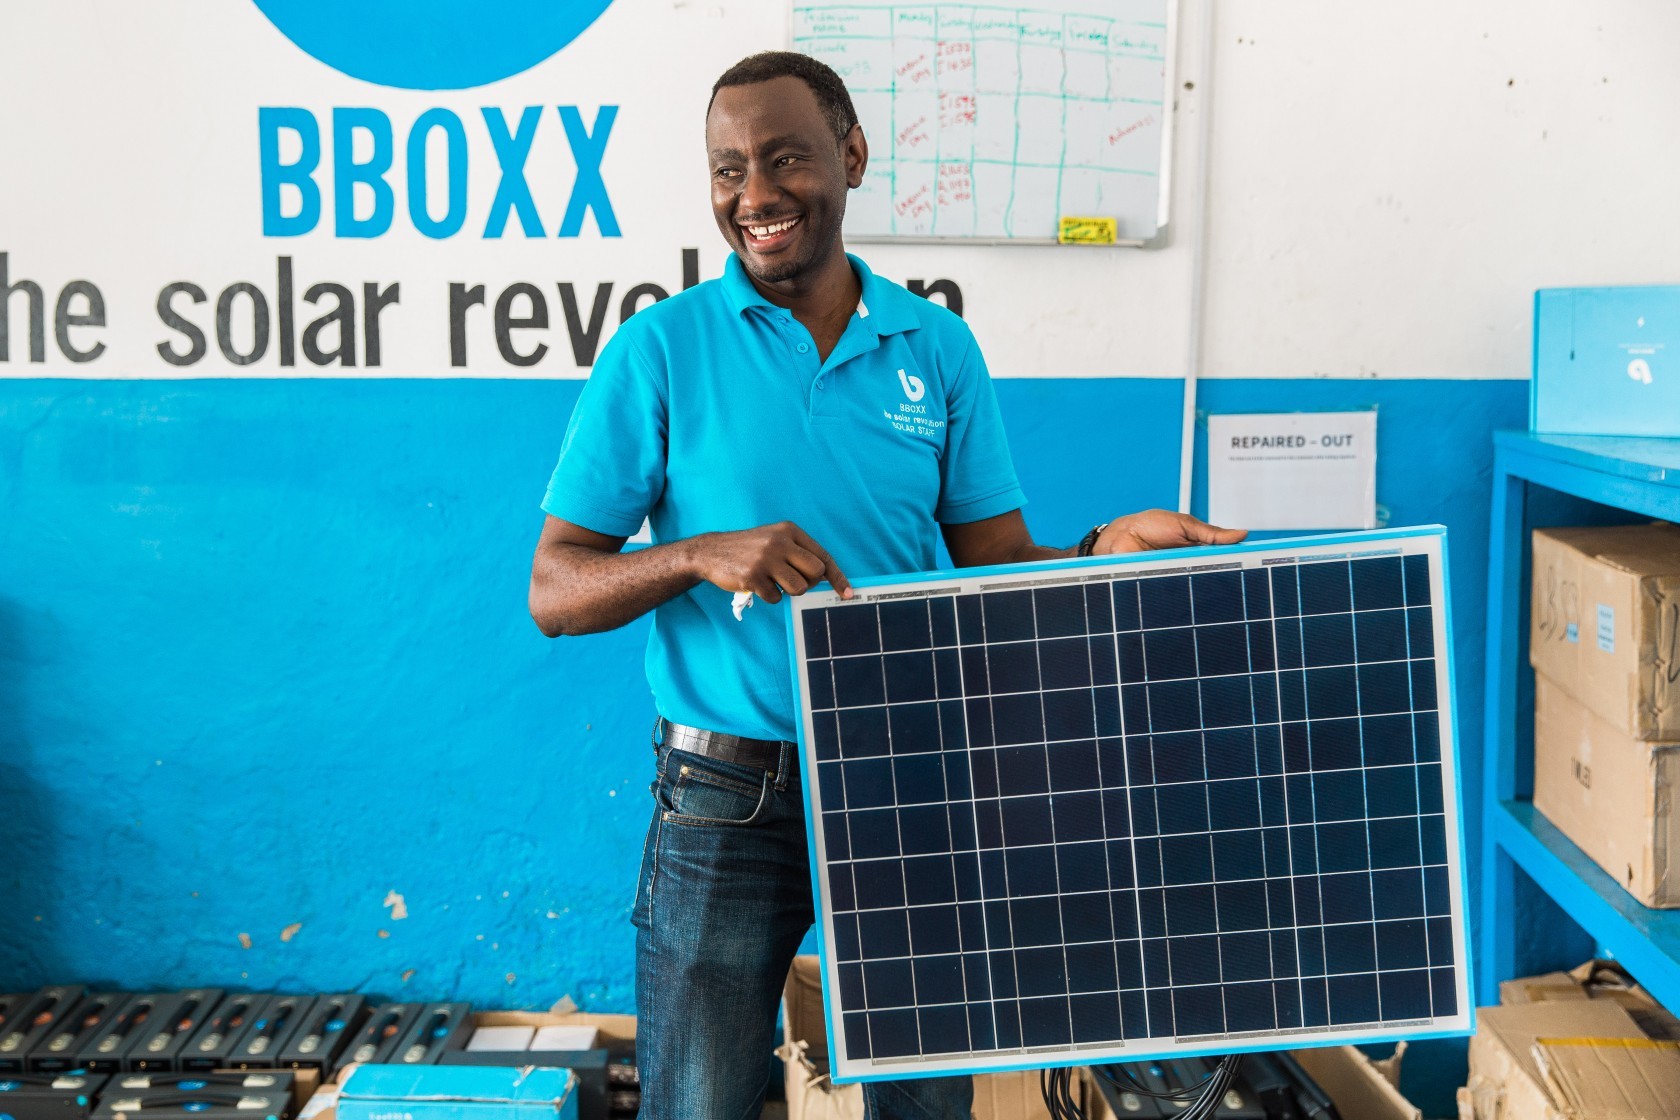 BBOXX is a venture backed next generation utility, developing solutions to provide affordable, clean energy to off-grid communities in the developing world.